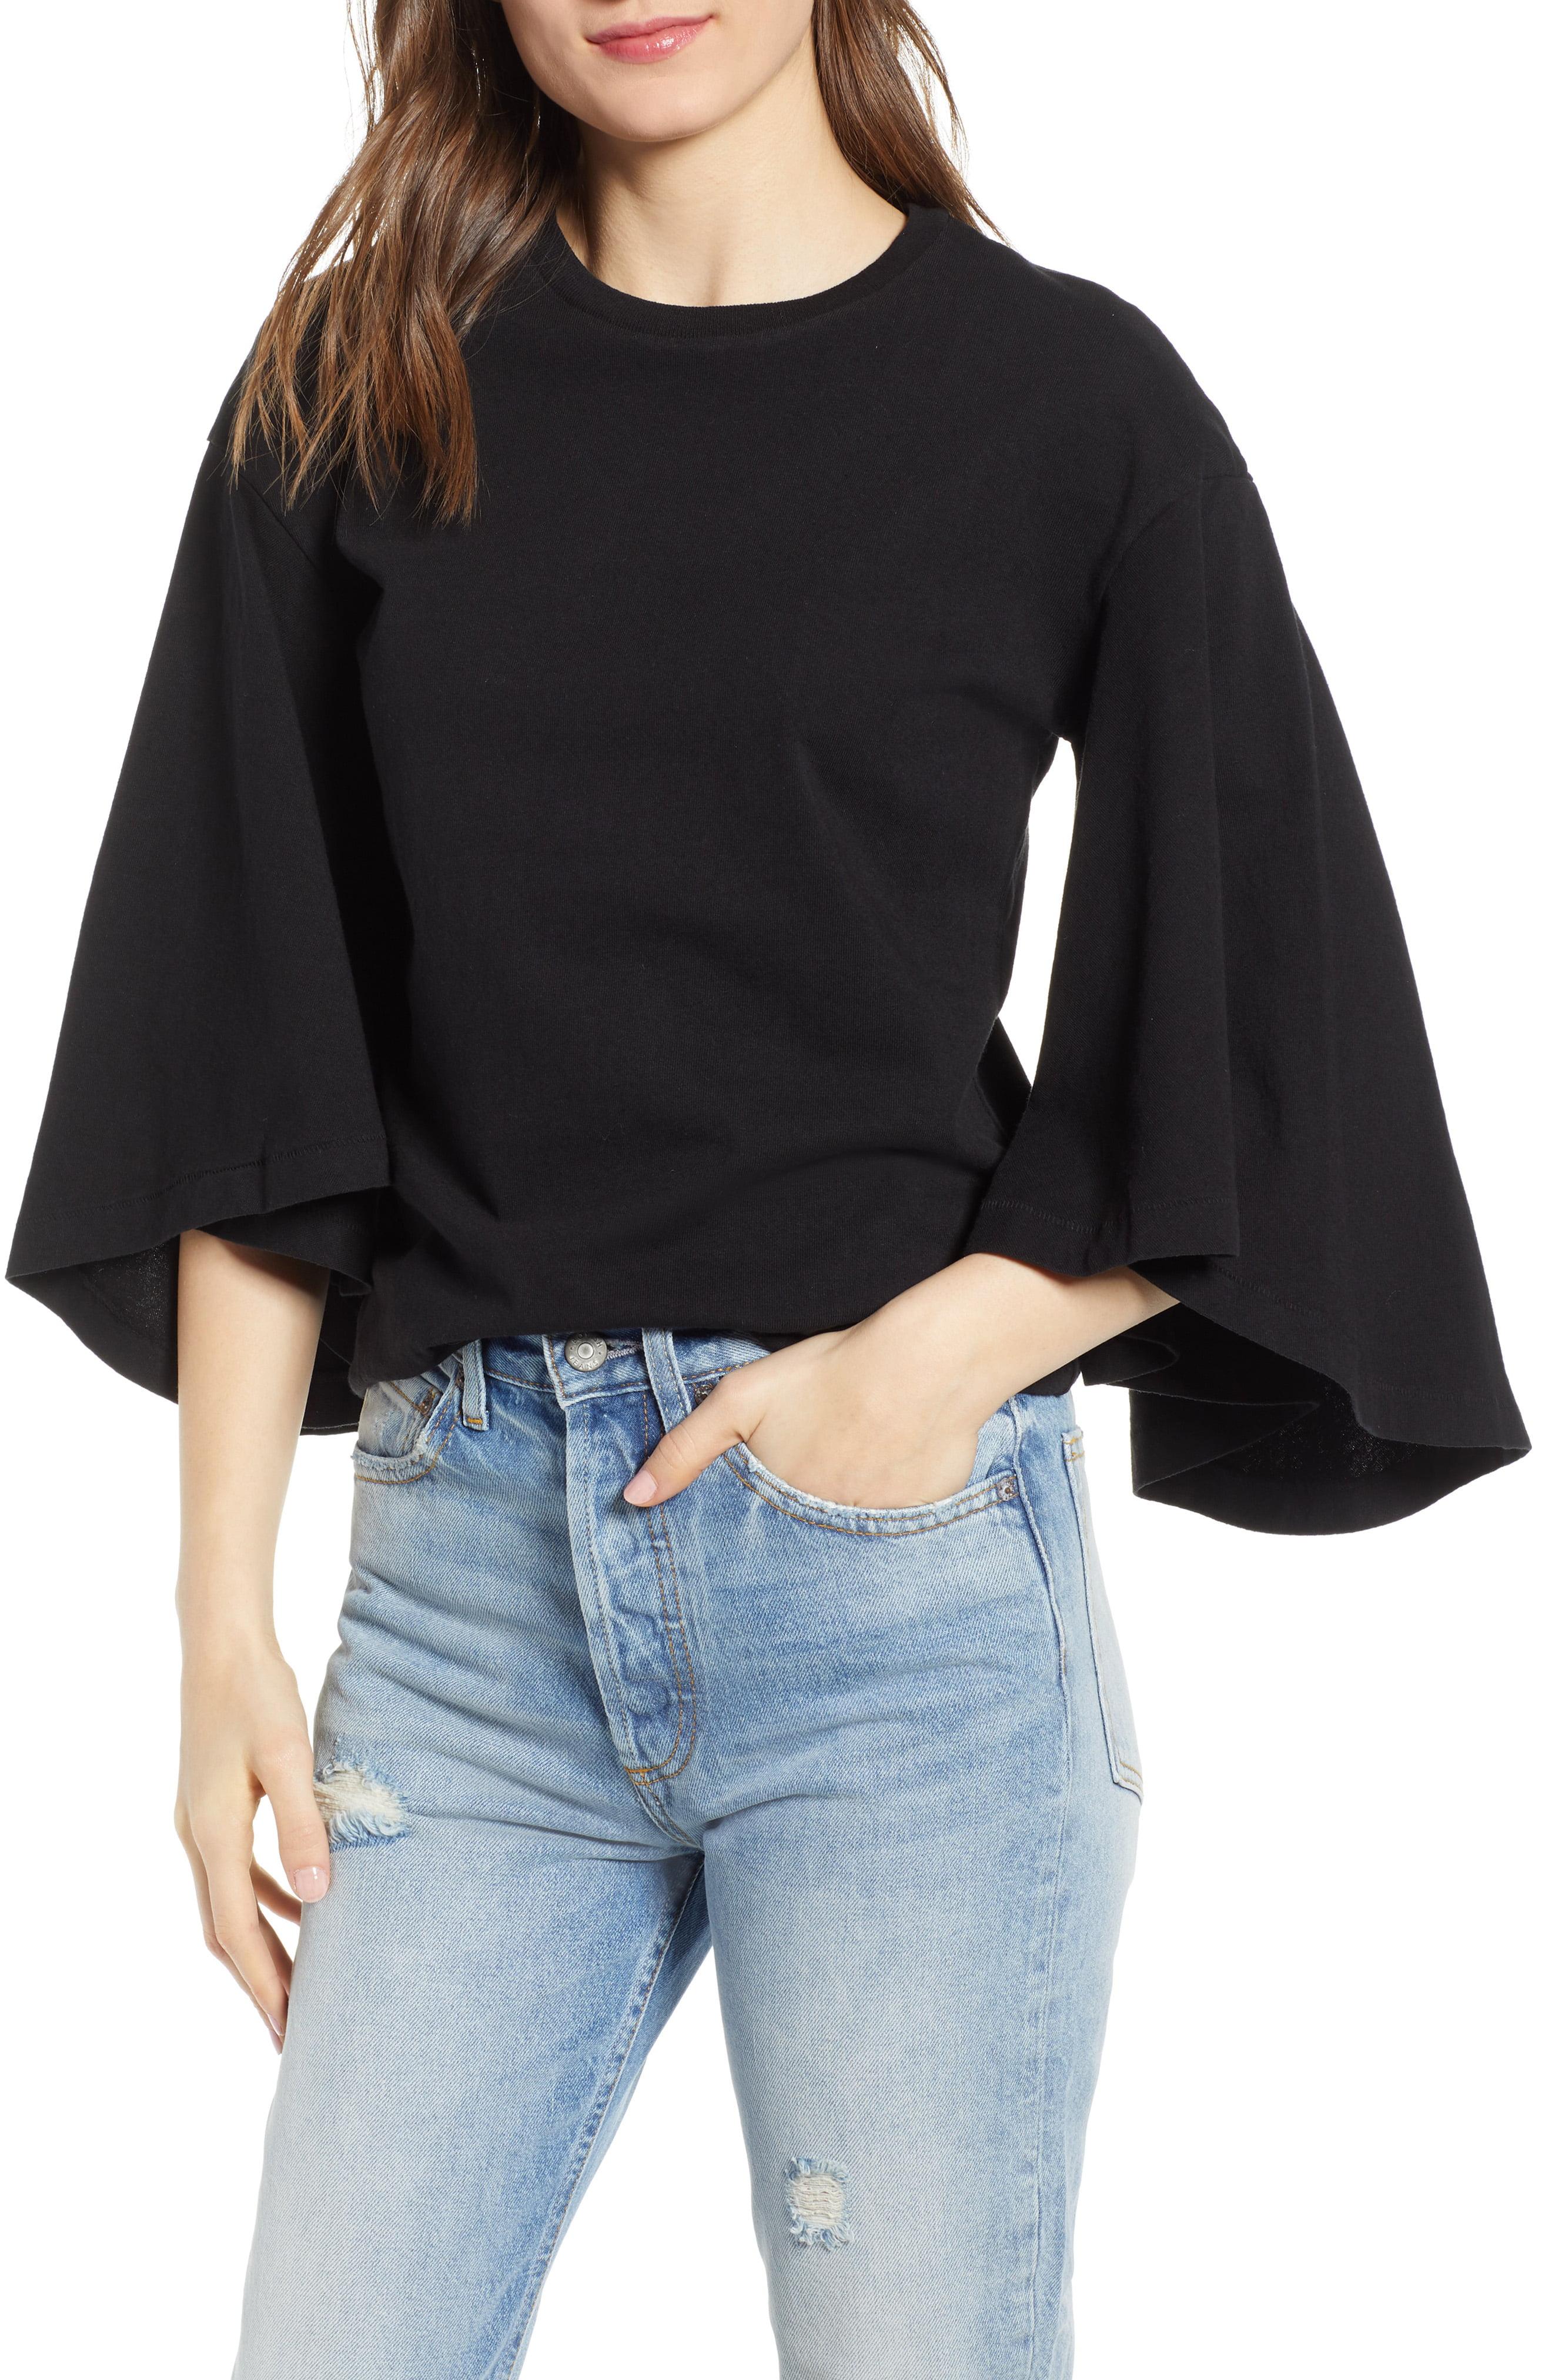 Lyst - Citizens of Humanity Flutter Batwing Sleeve Cotton Top in Black